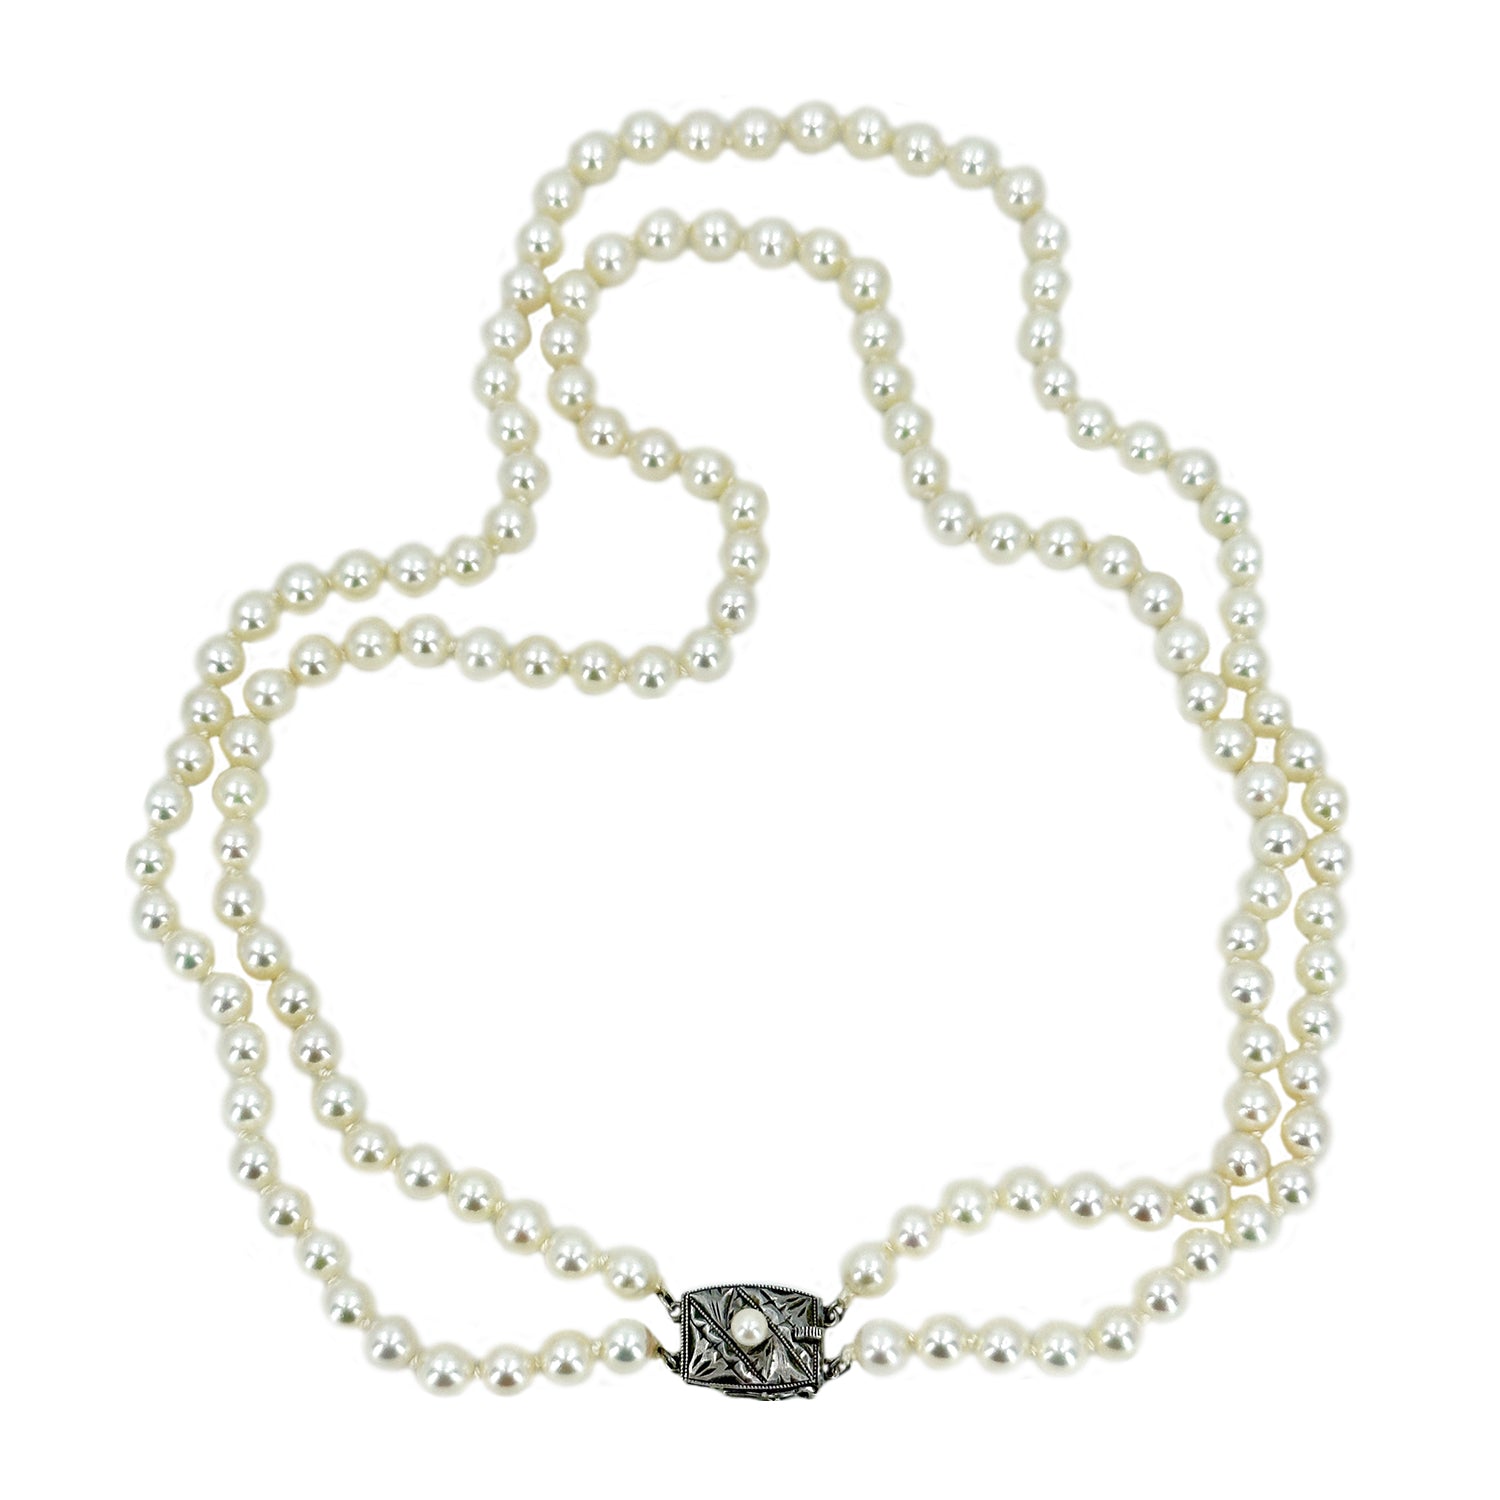 Art Deco Engraved Double Strand Japanese Cultured Akoya Pearl Choker Necklace -Sterling Silver 15.75 & 16.75 Inch